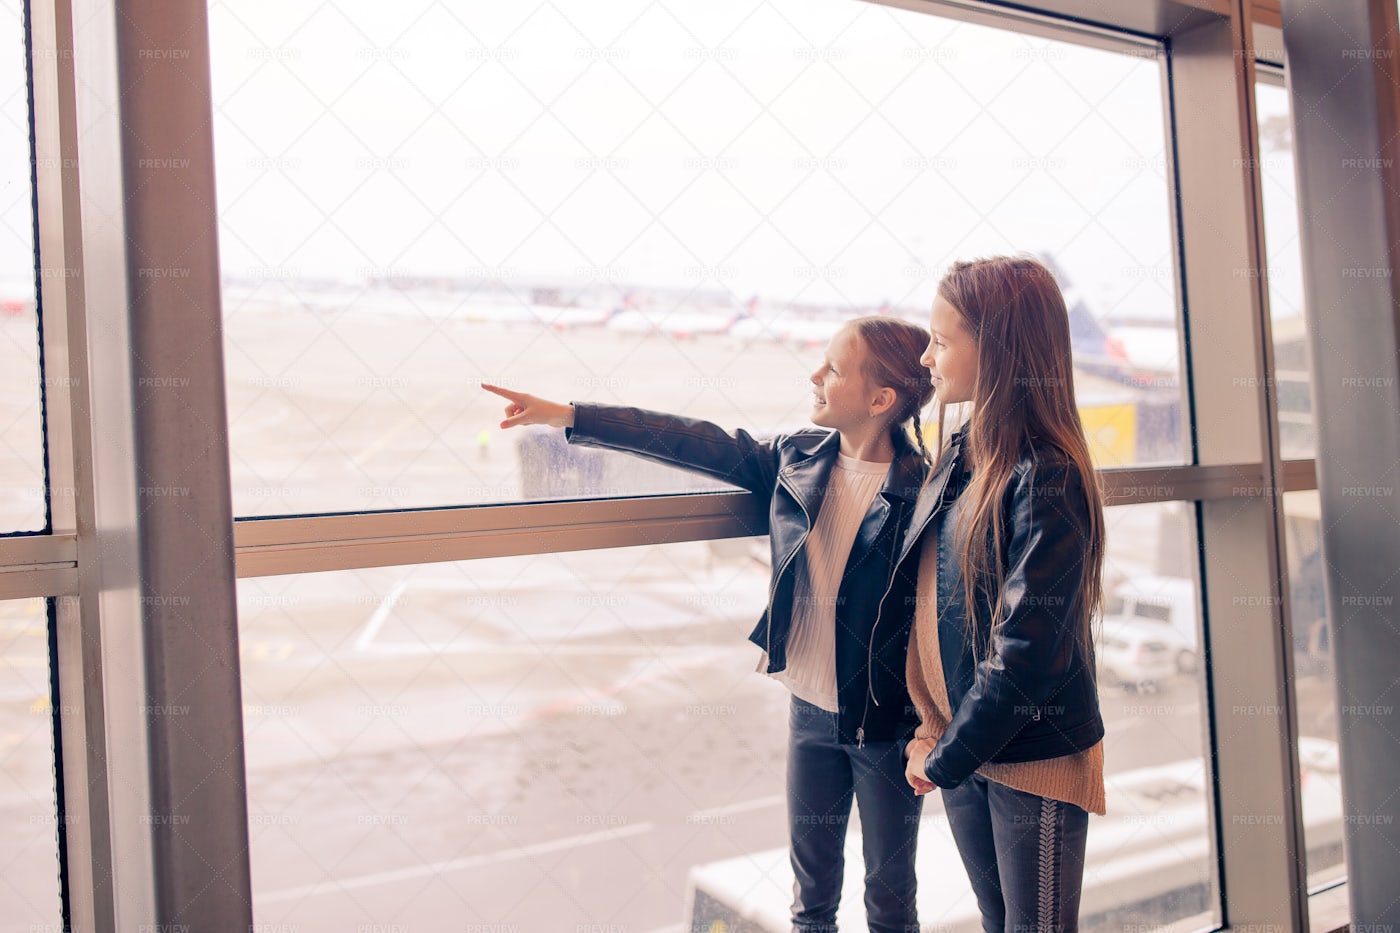 Girls Waiting For Boarding: Stock Photos